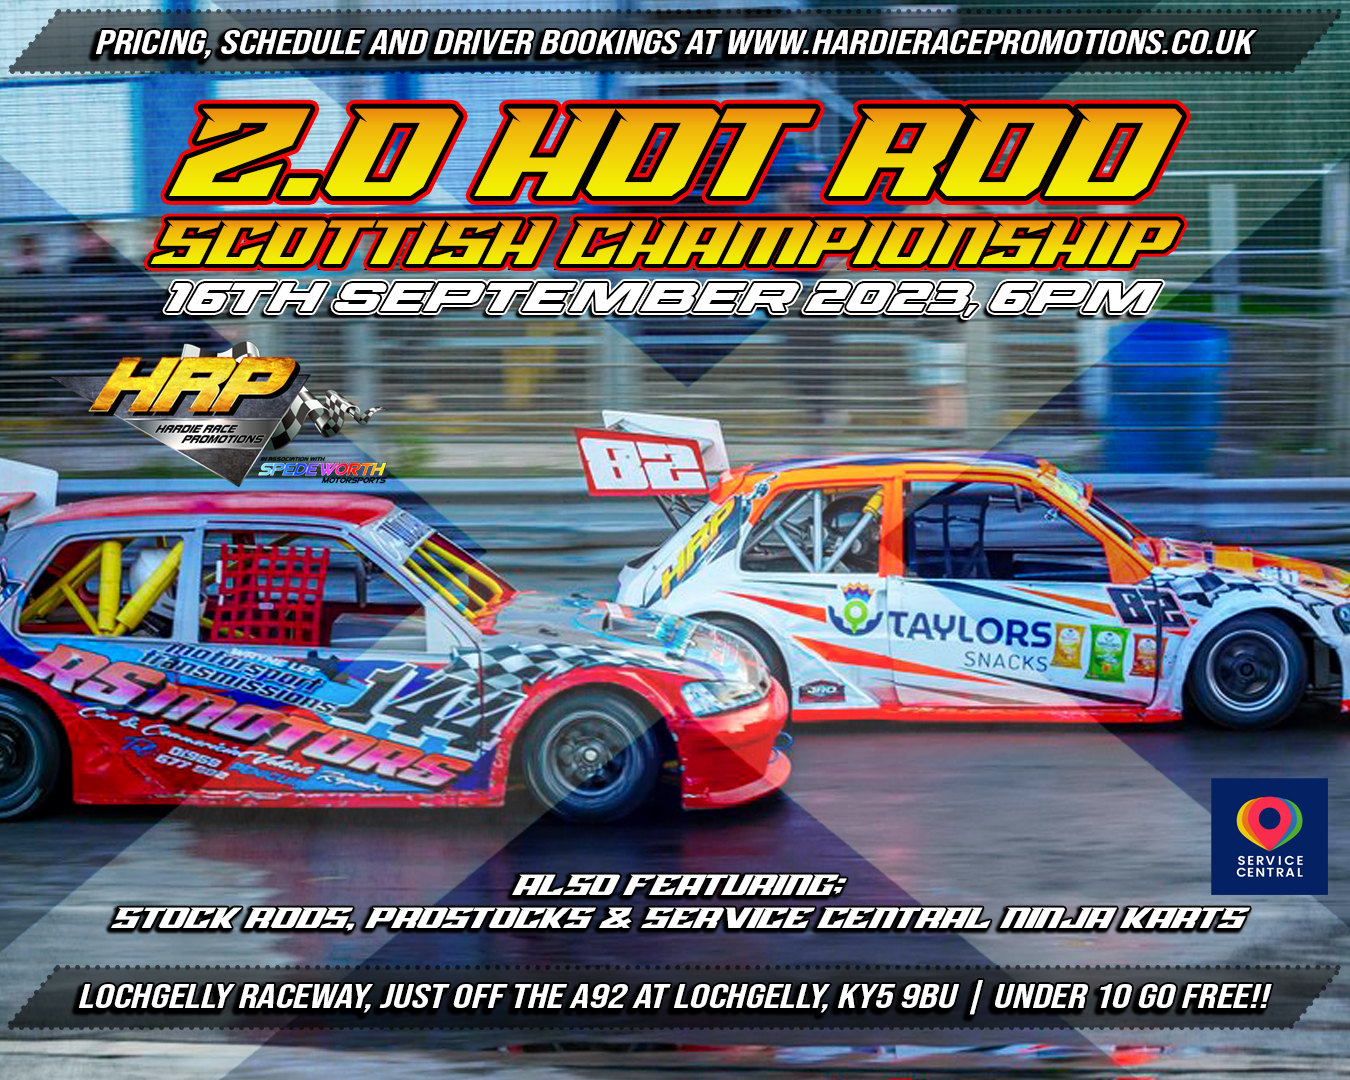 Hot Rod Scottish Up For Grabs